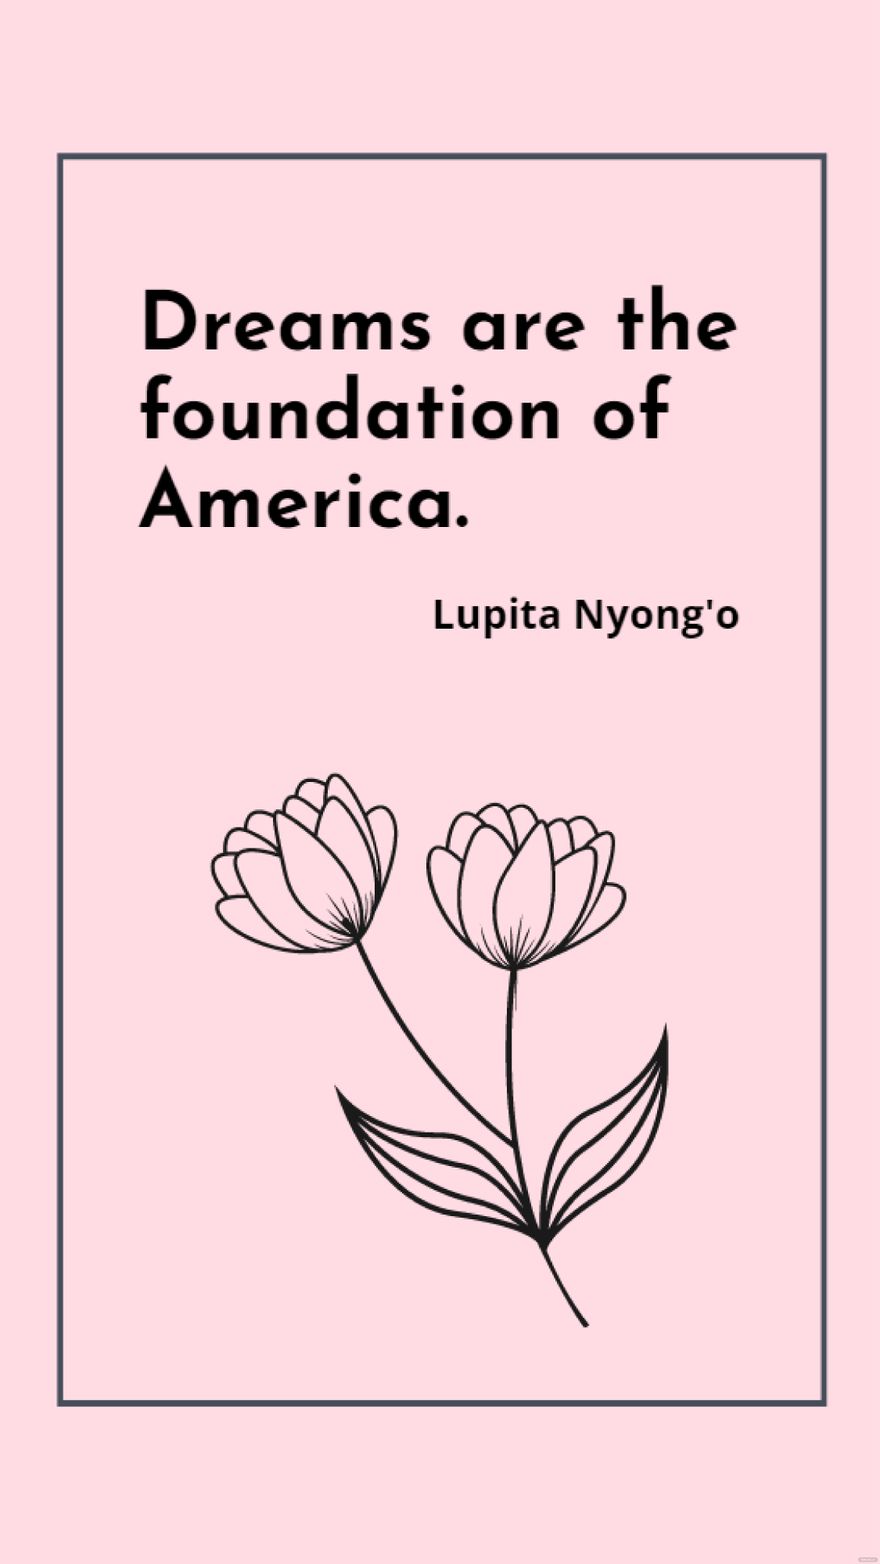 Lupita Nyong'o - Dreams are the foundation of America. in JPG